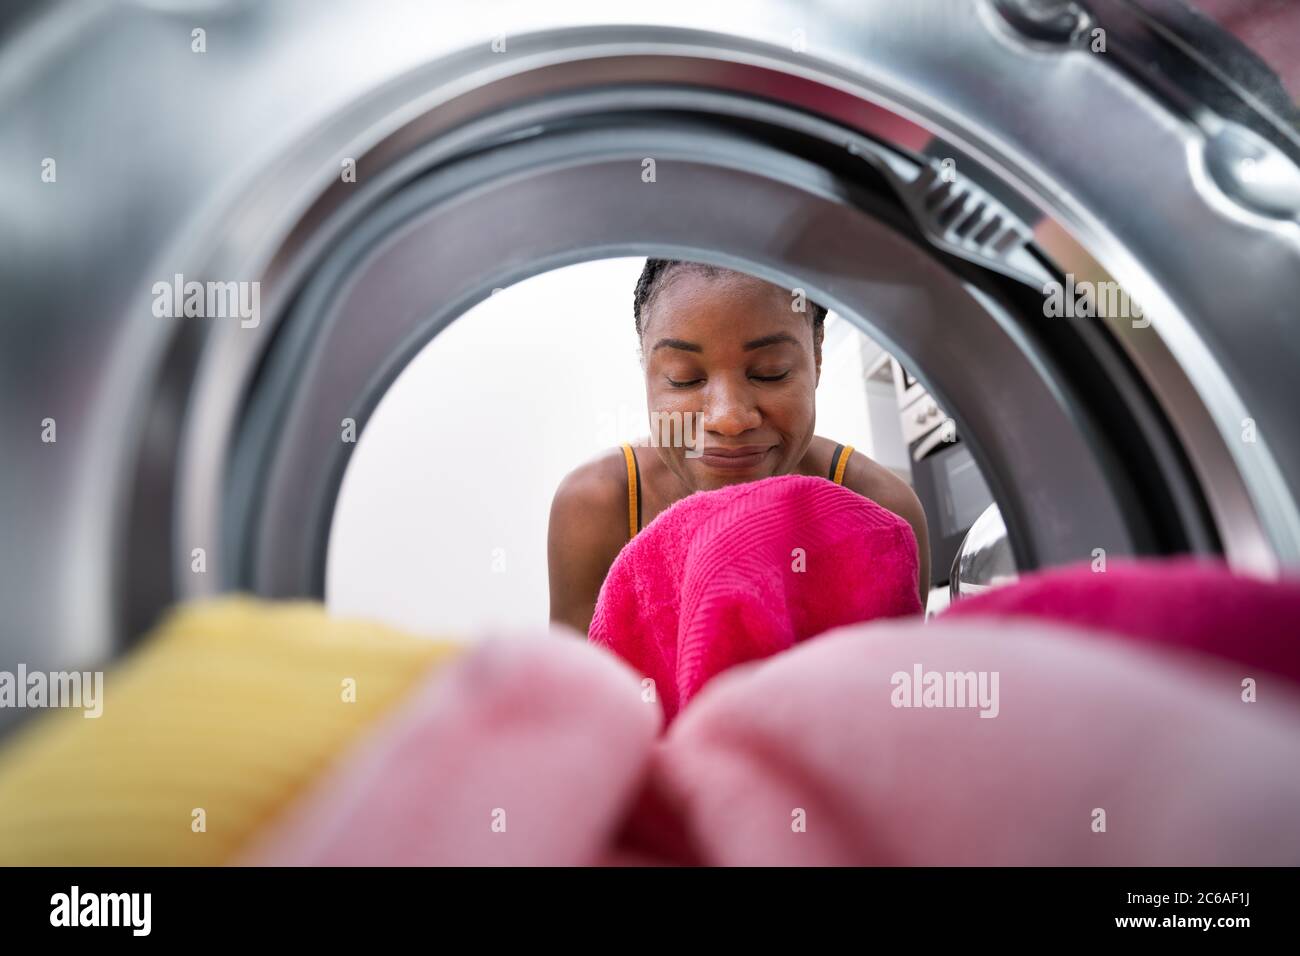 Smelling Washed Clothes Or Laundry At Home Stock Photo